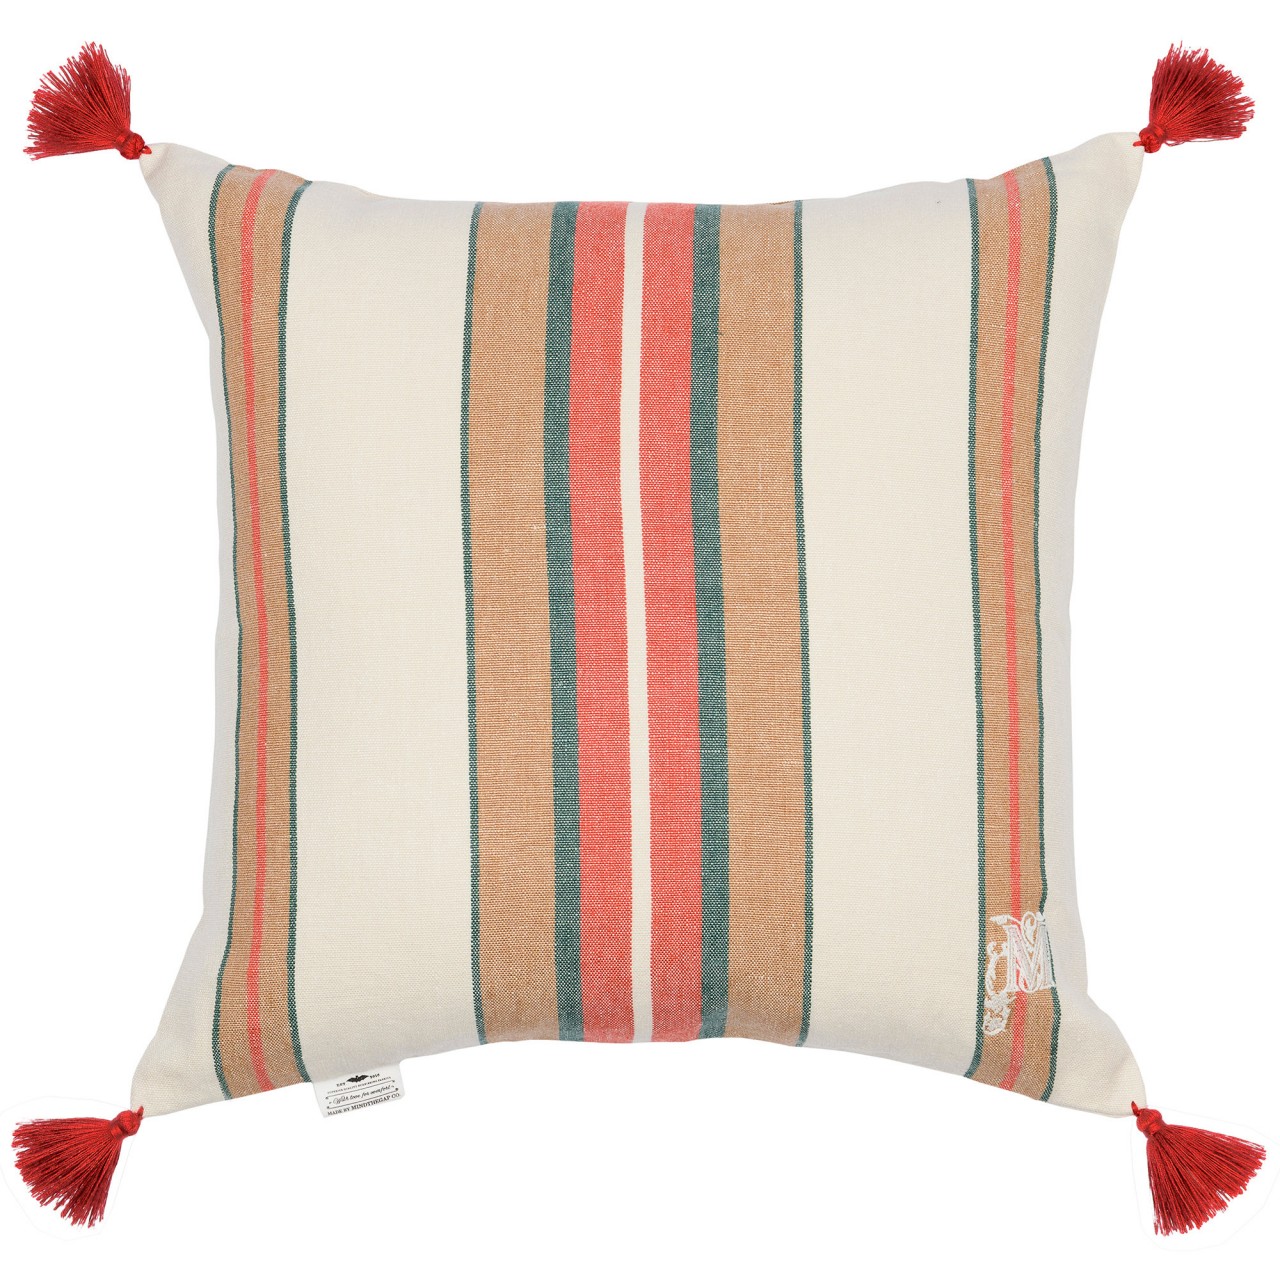 images/productimages/small/01-herina-stripe-heavy-linen-cushion-50x50cm-lc40095-1.jpg